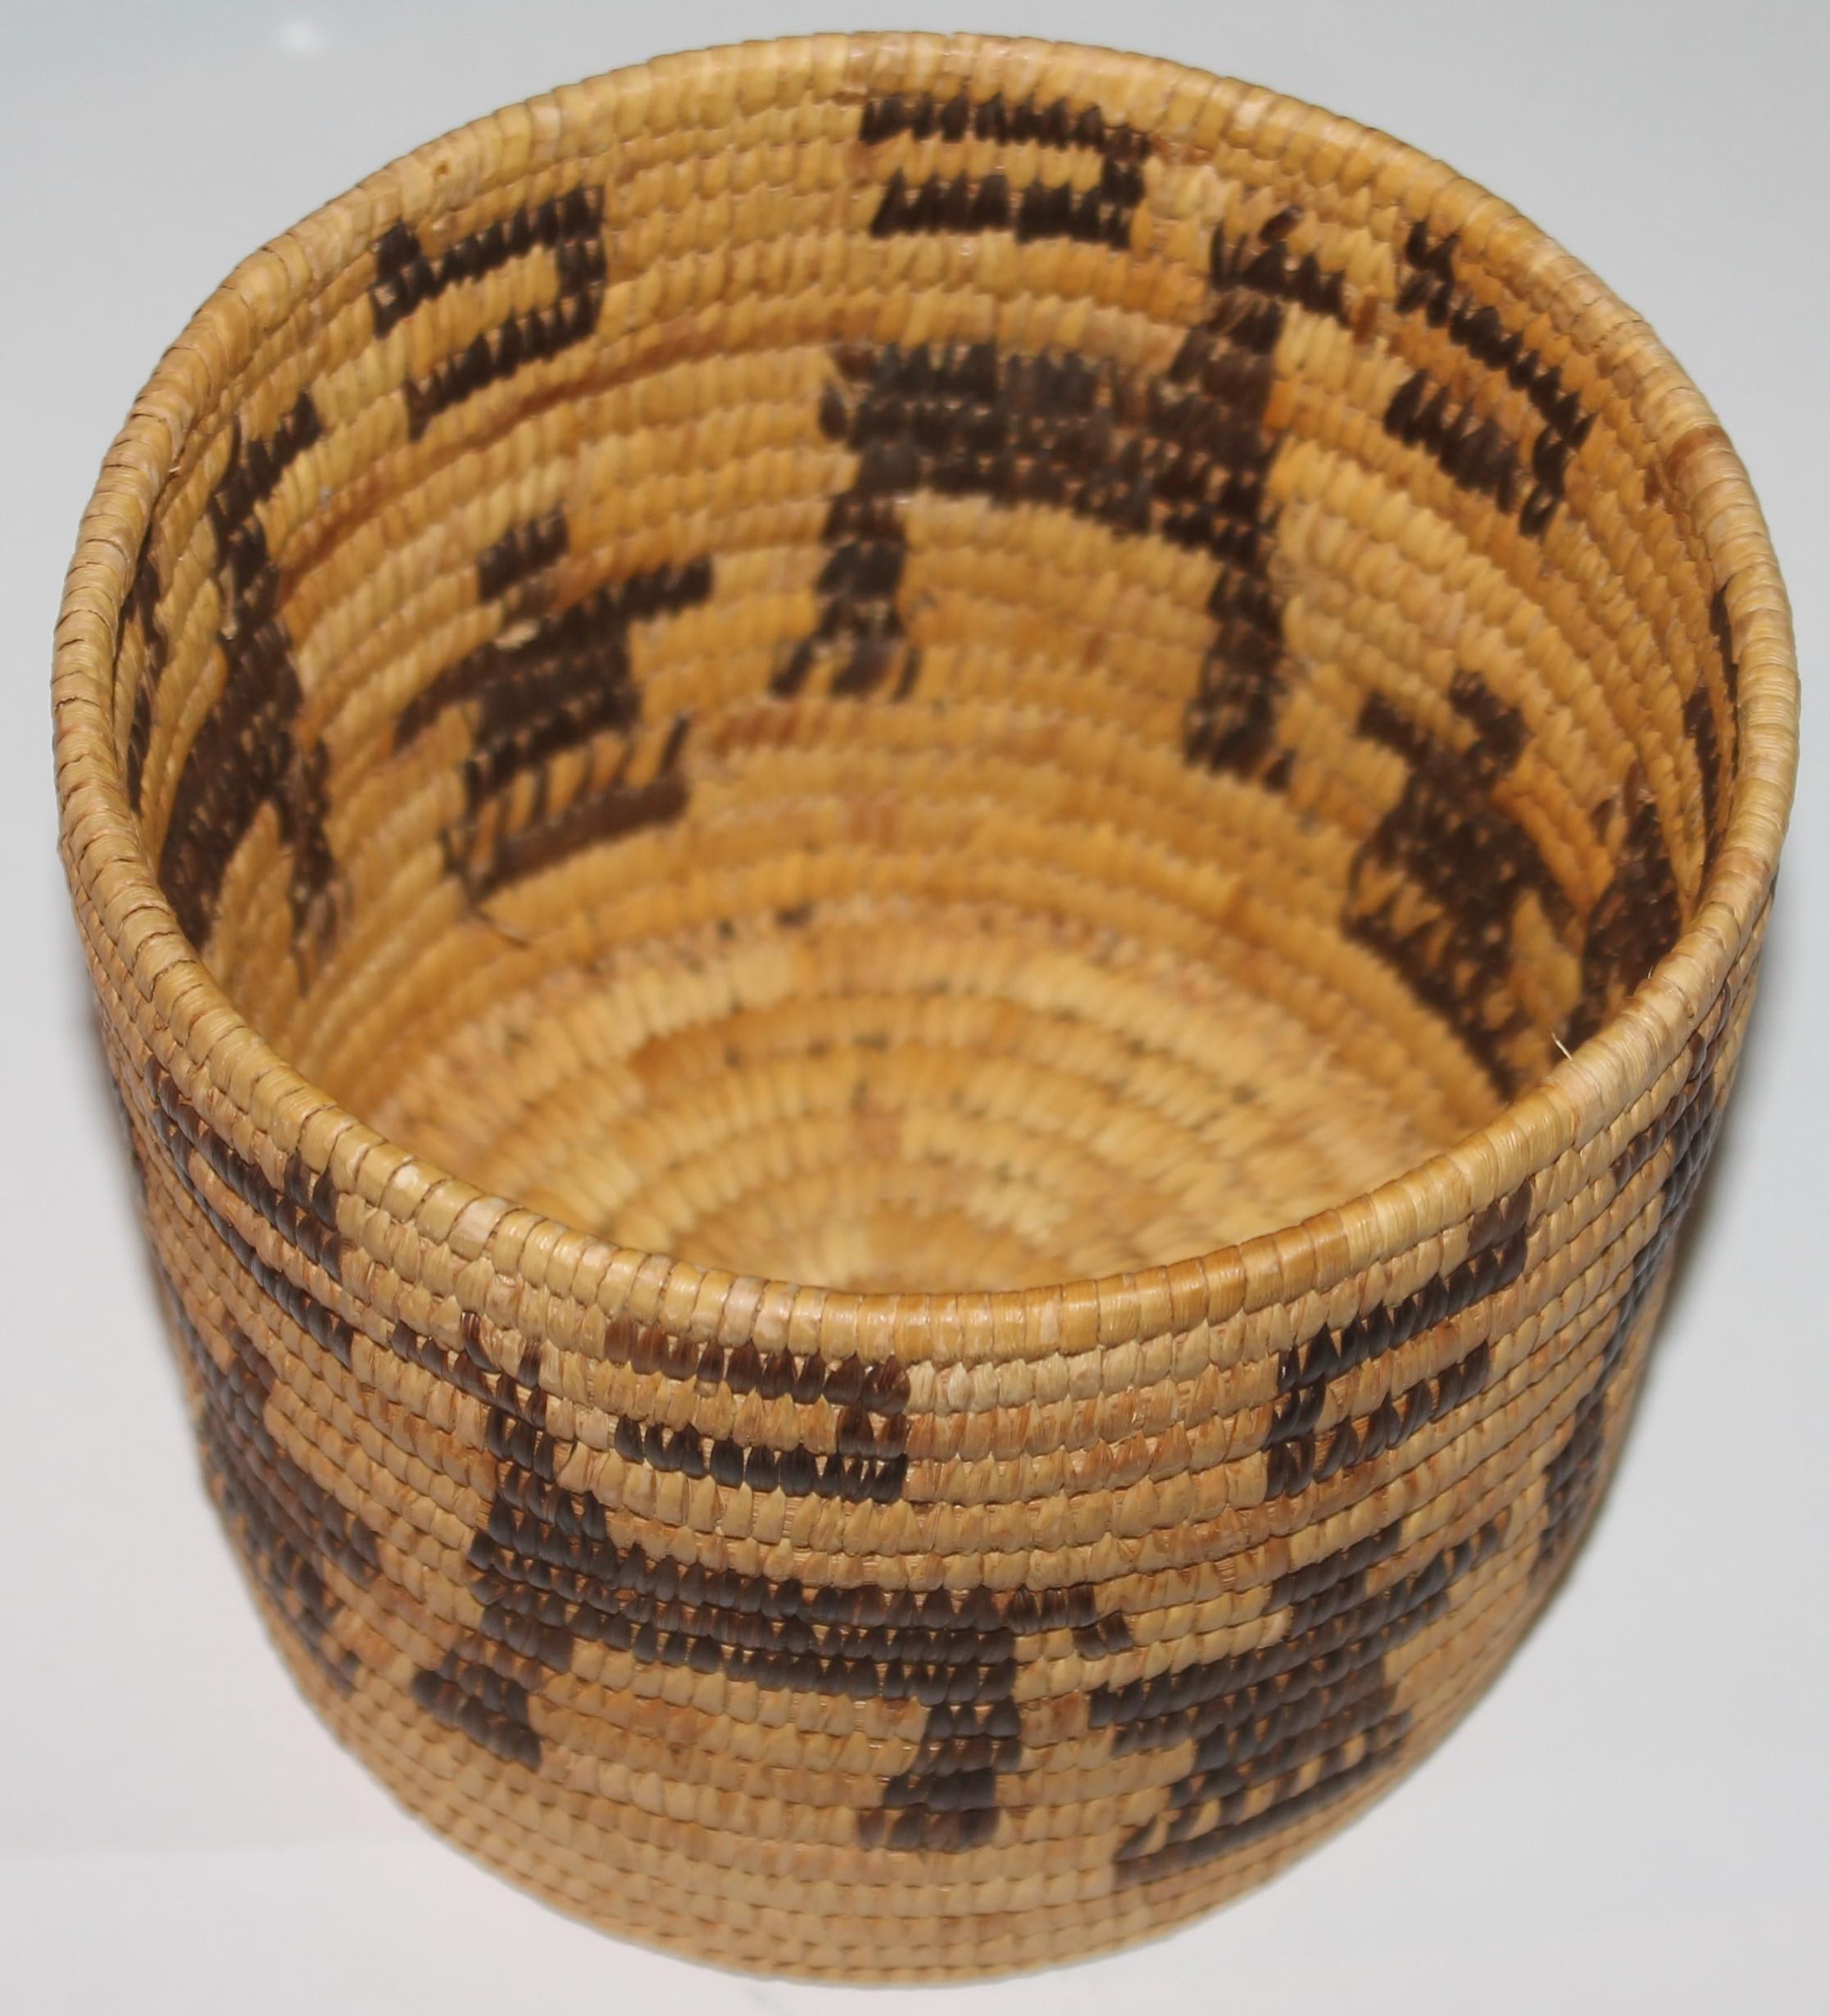 Adirondack Amazing Pictorial Pima Indian Basket W/ Lid For Sale